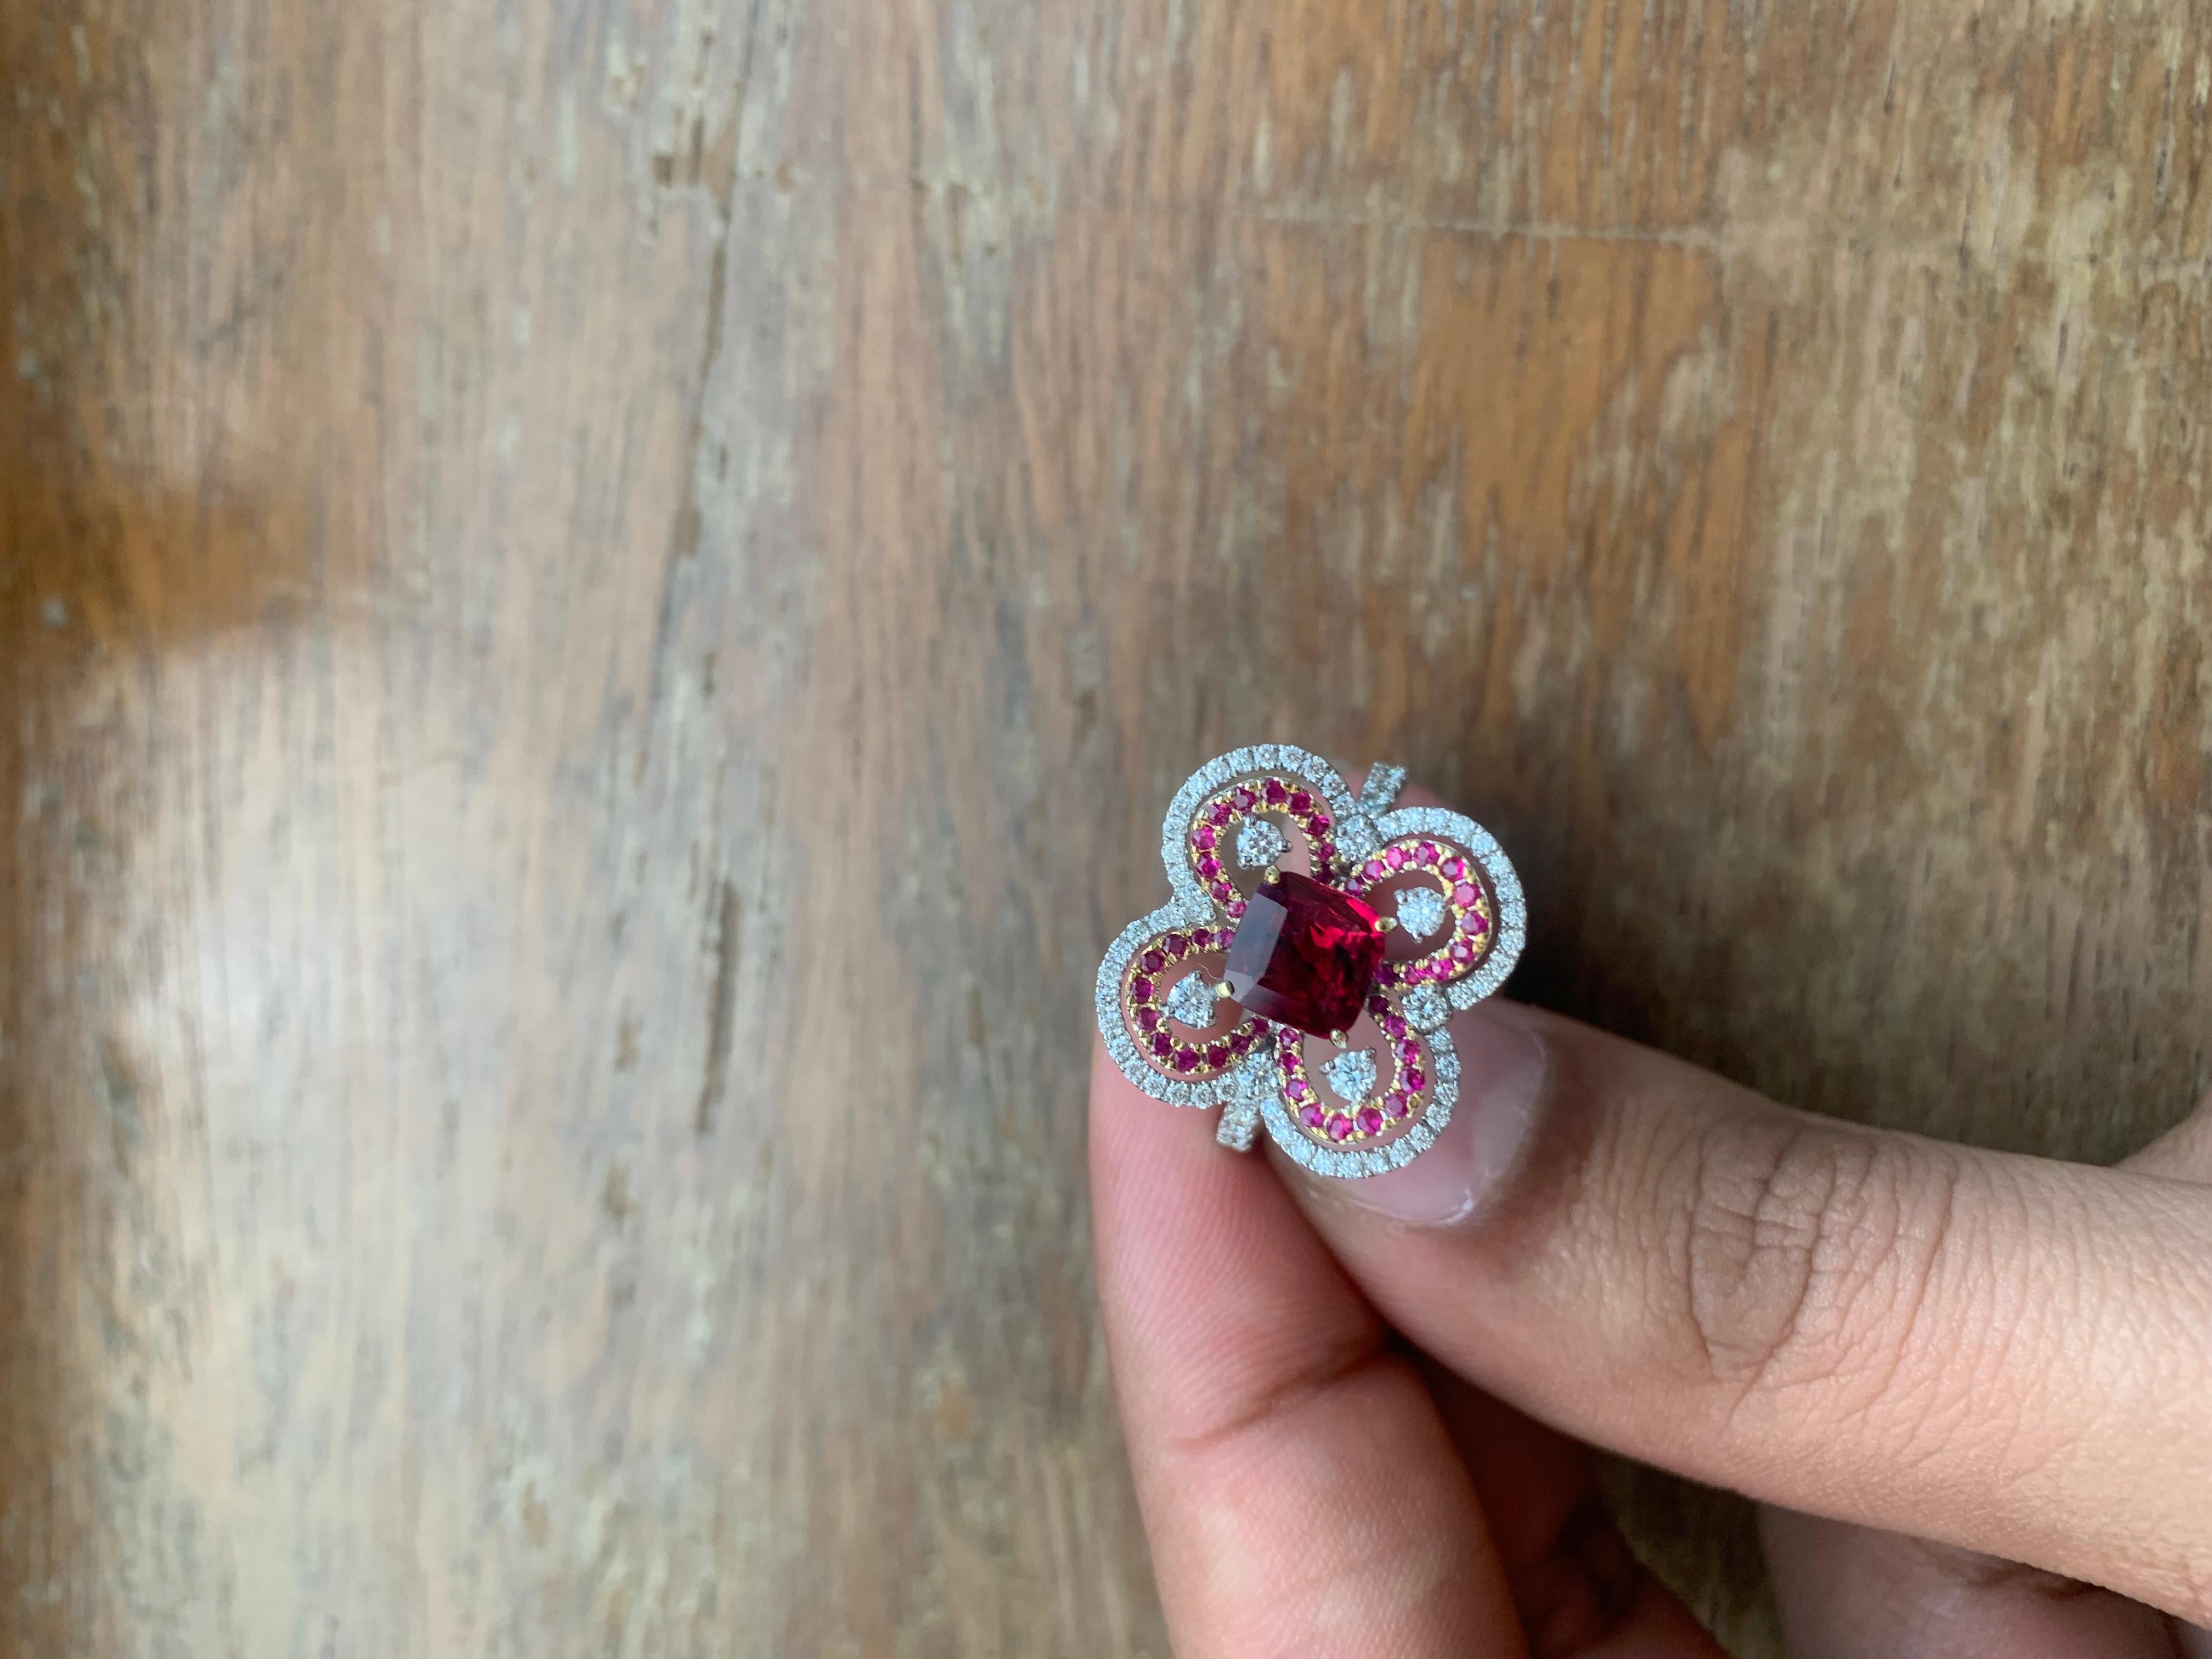 A brand new handcrafted ruby ring by Rewa Jewels. The ring's center stone is 1.50 carat Burmese ruby certified by Gem Research Swisslab (GRS) as natural, unheated, 'Pigeon blood' with the certificate number: 2022-110367. The centre ruby has been set